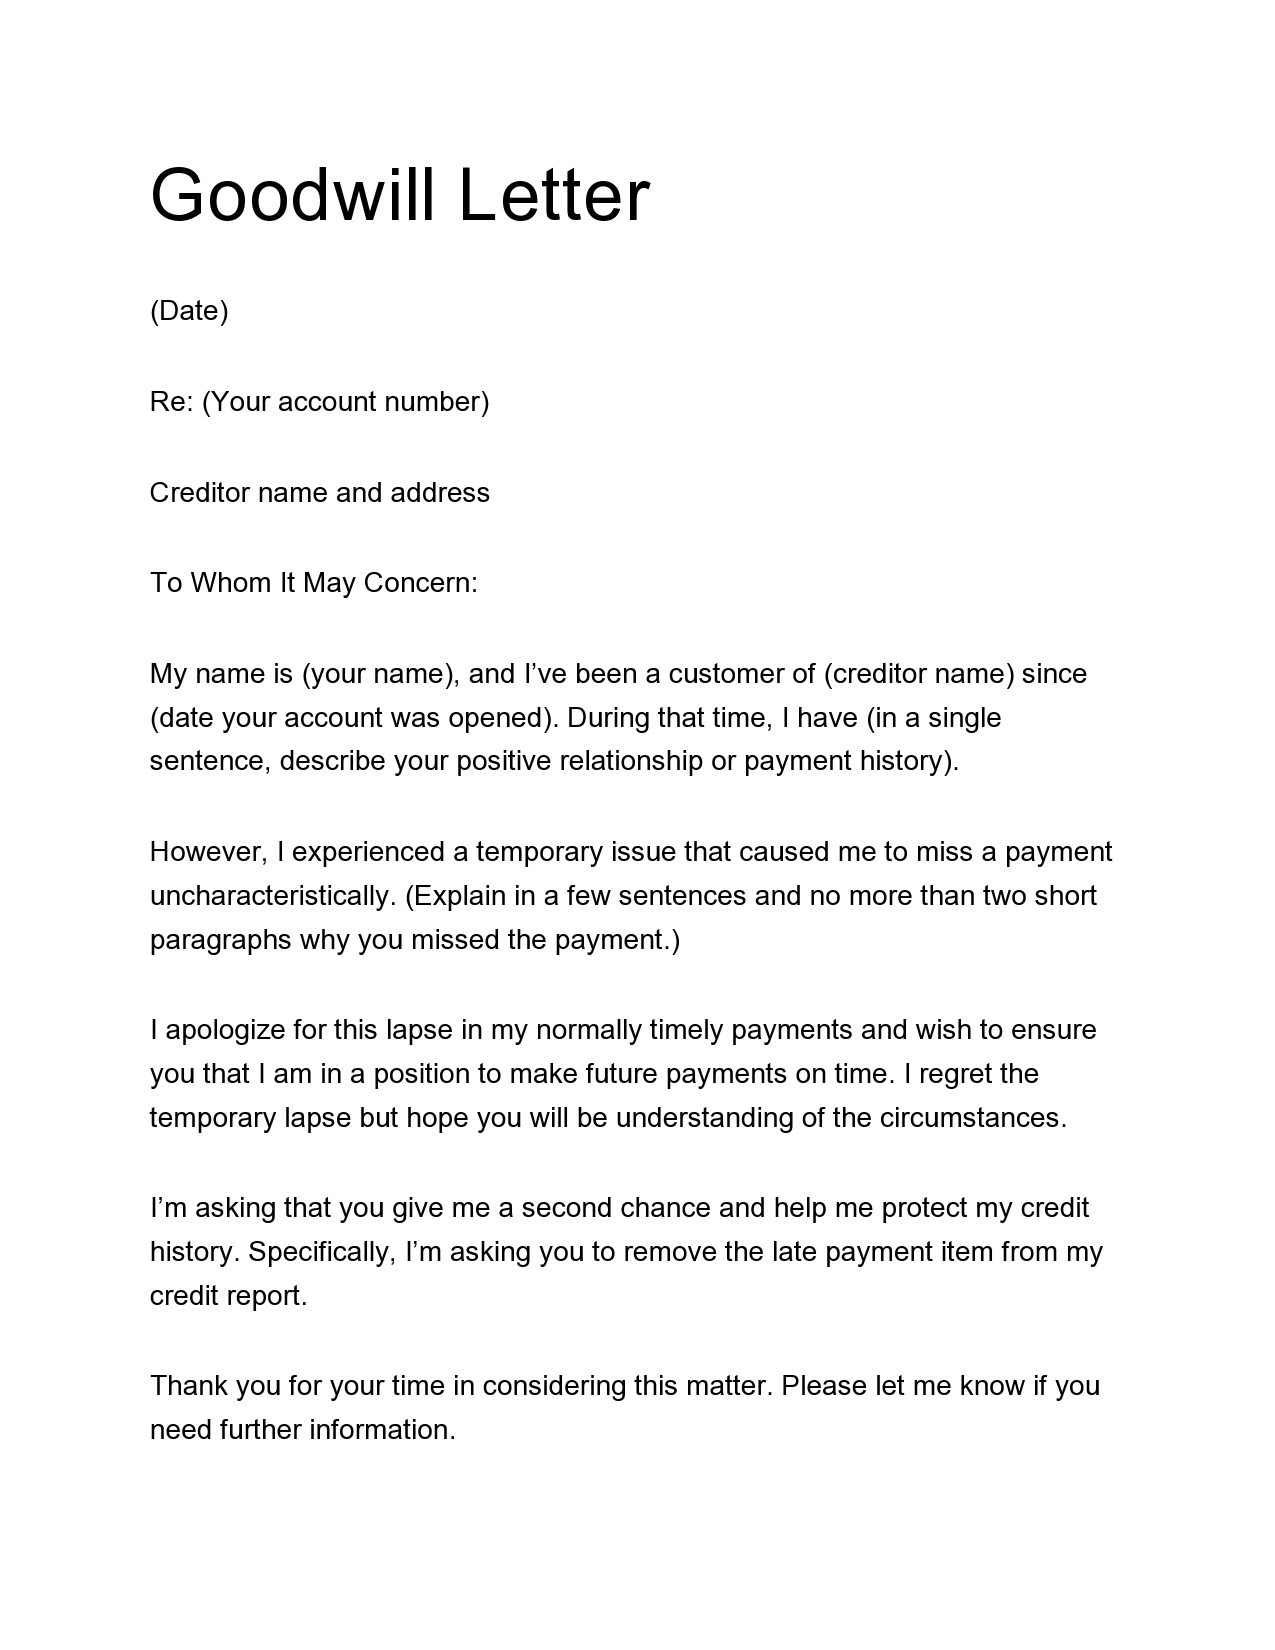 Free goodwill letter template 40